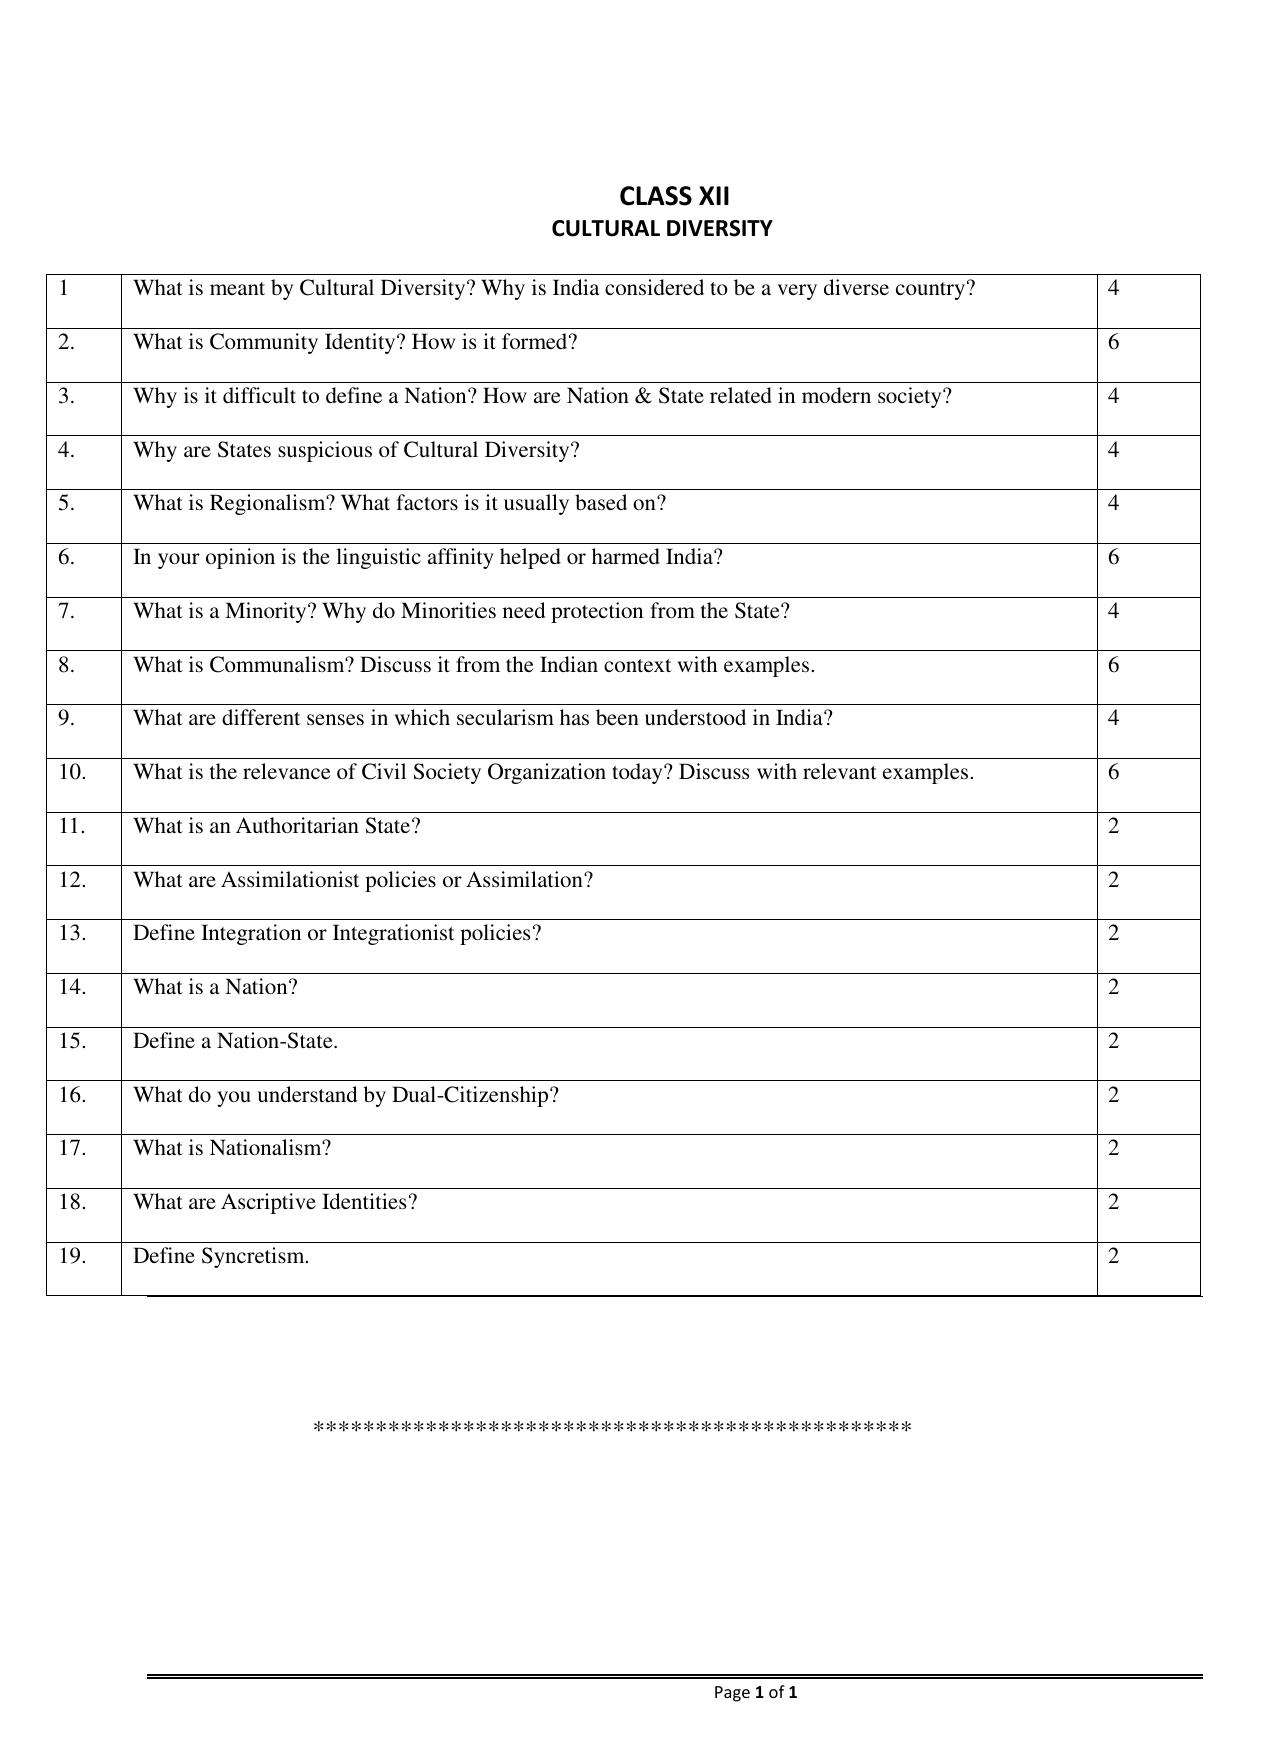 CBSE Sociology Cultural Diversity Worksheets - Page 1